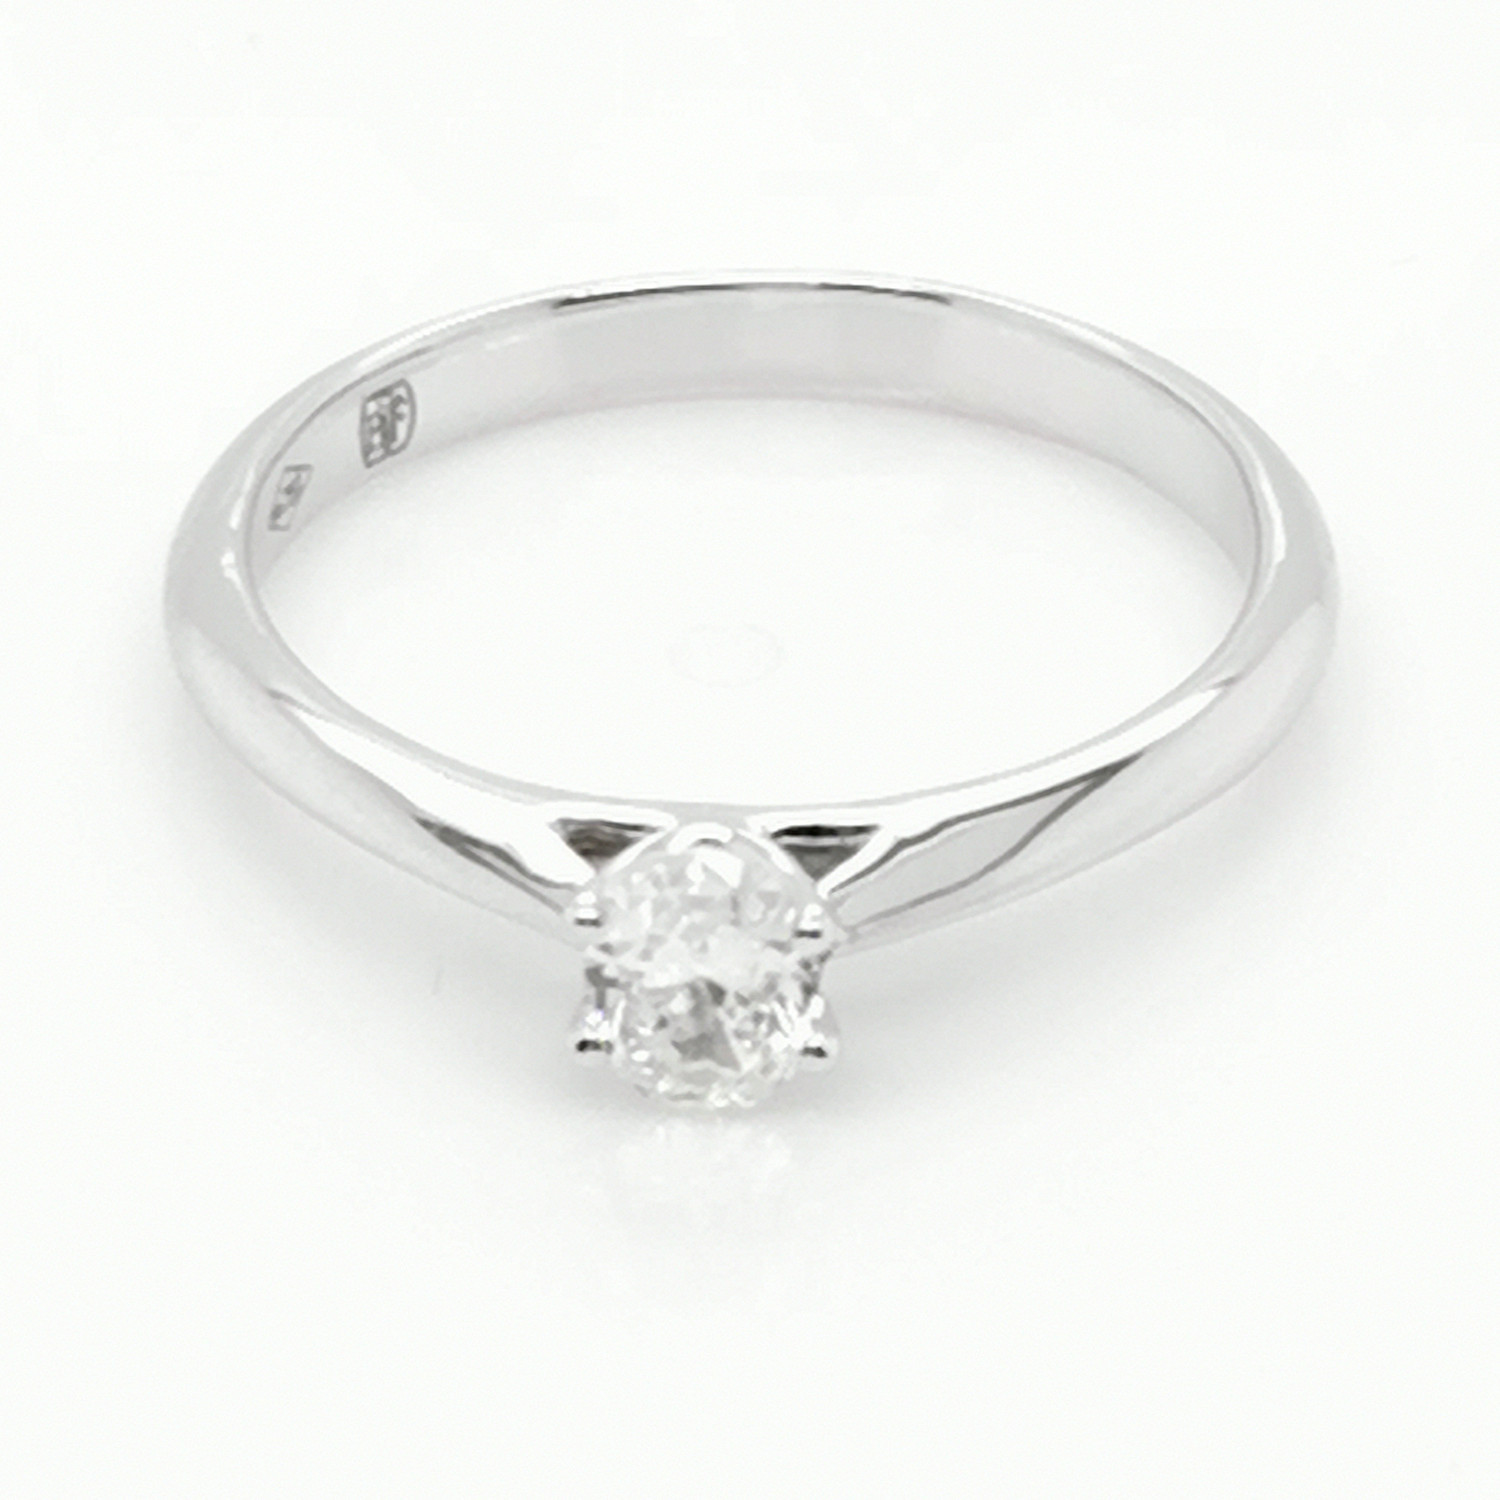 Solitaire diamant ovale or blanc 18 carats